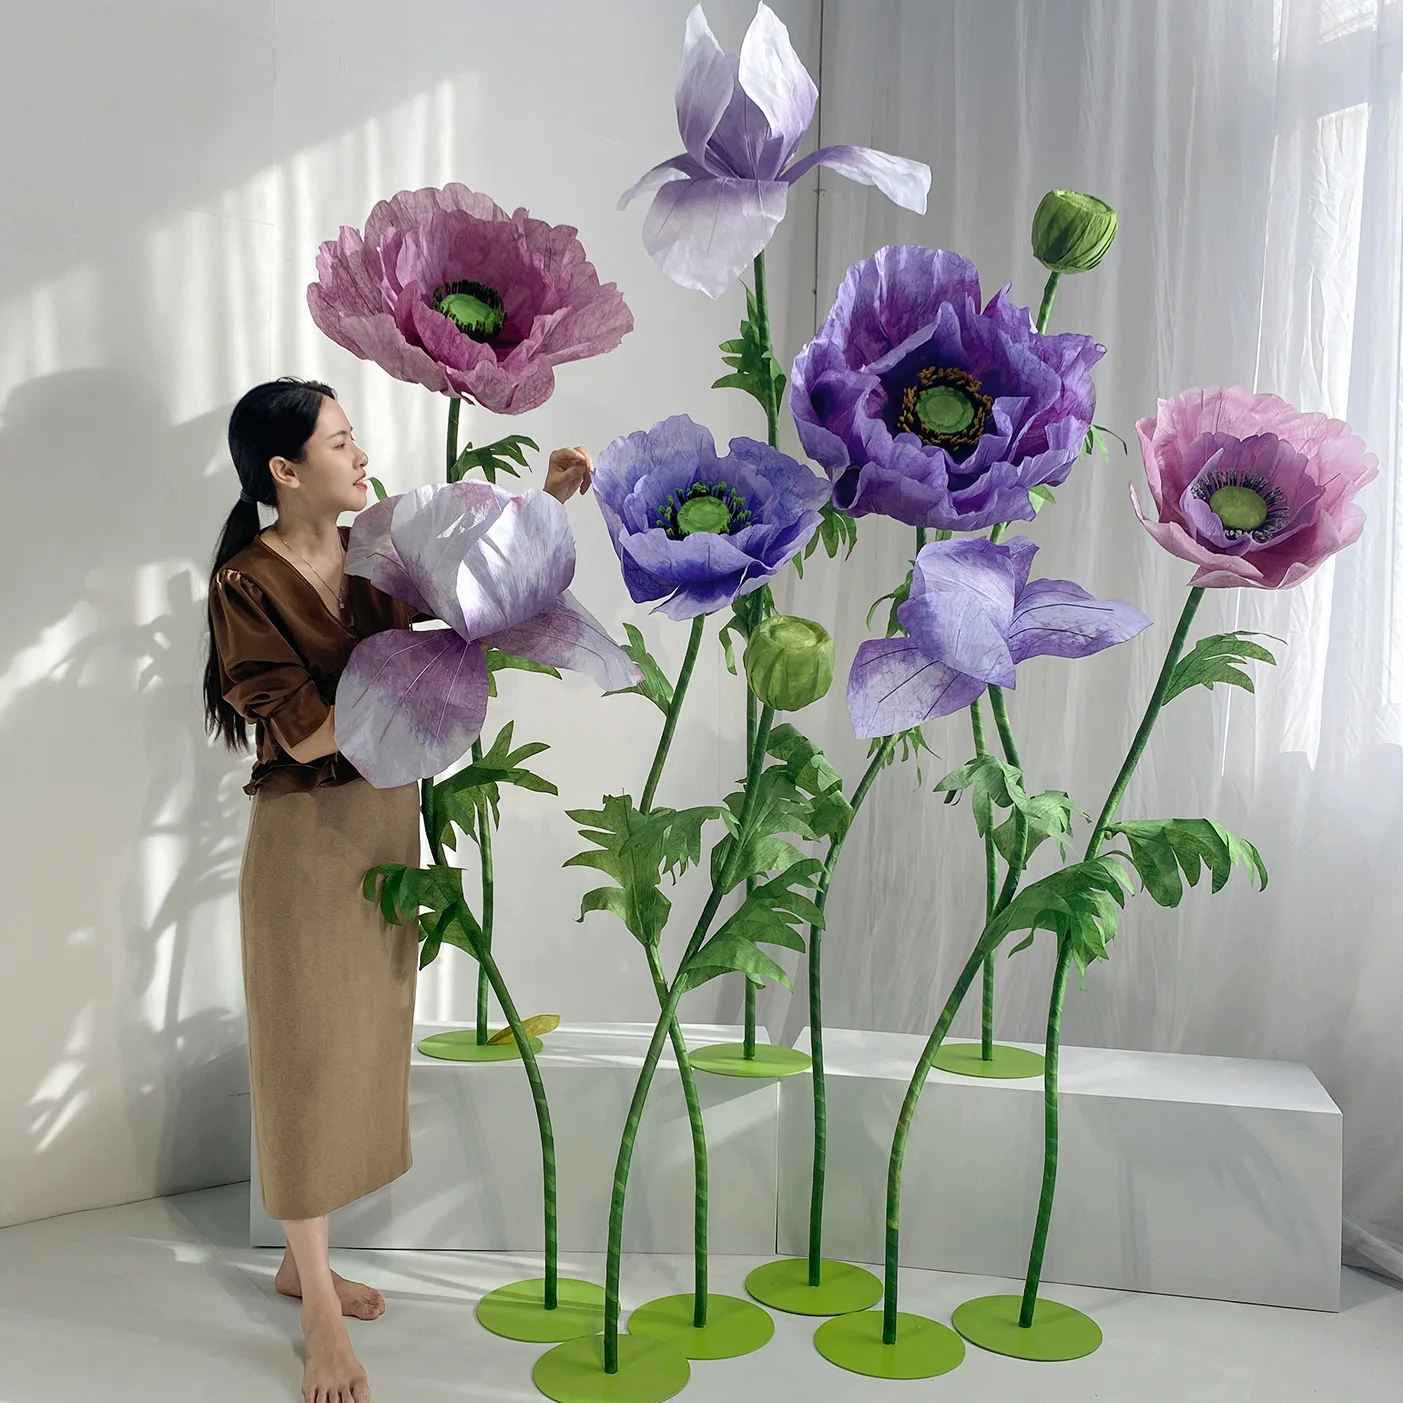 How to Make Giant Colorful Paper Flowers — Live Colorful